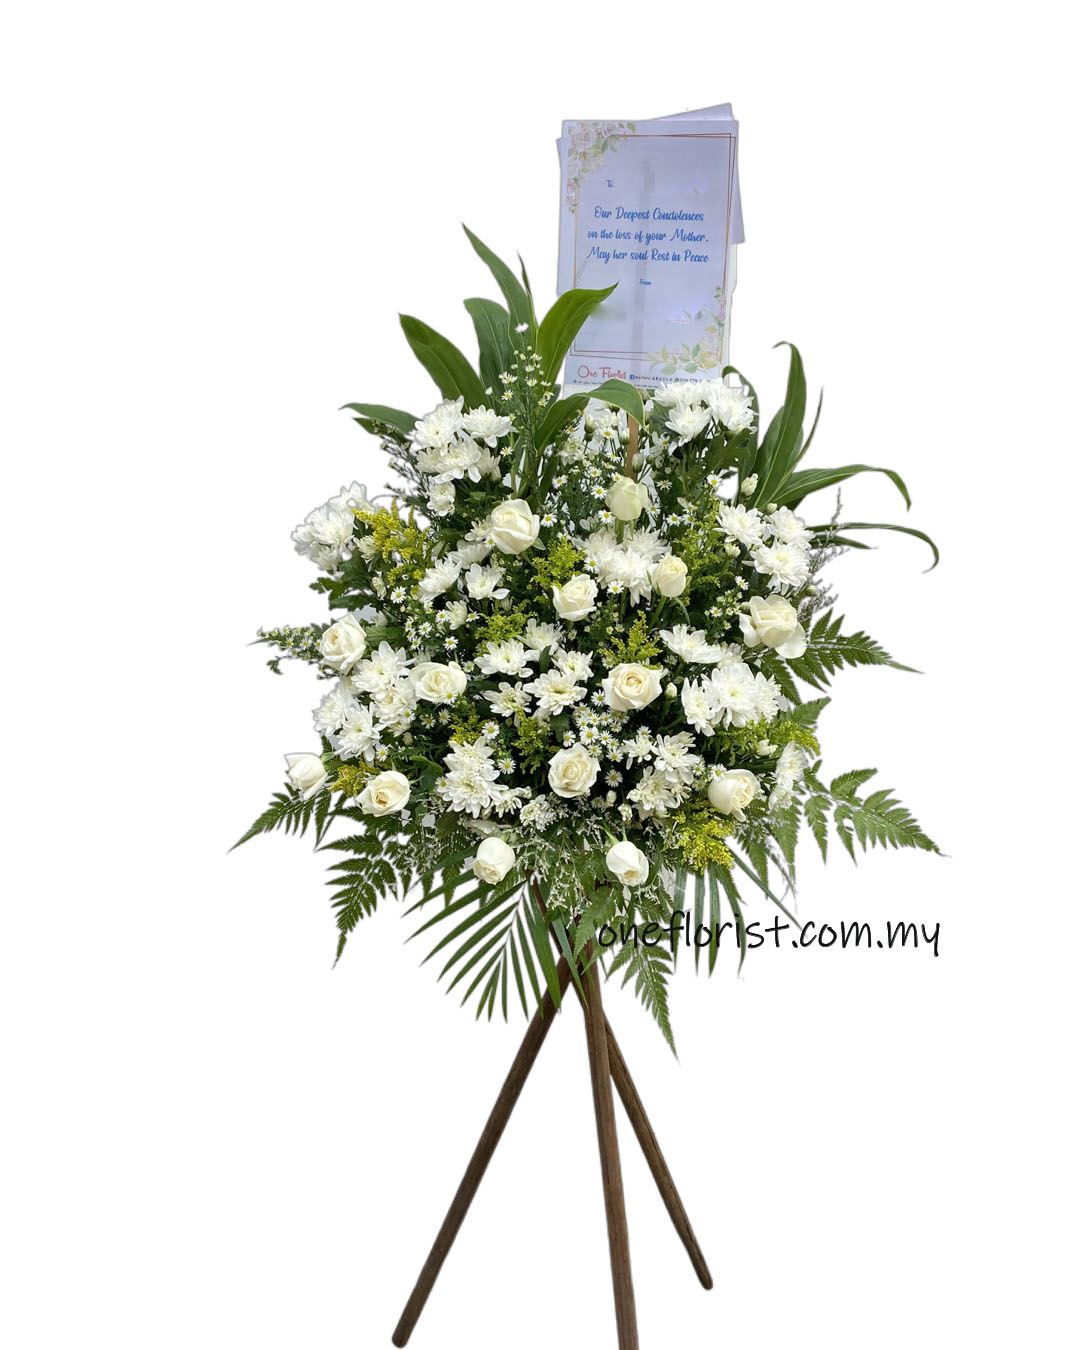 Condolence flower with white rose